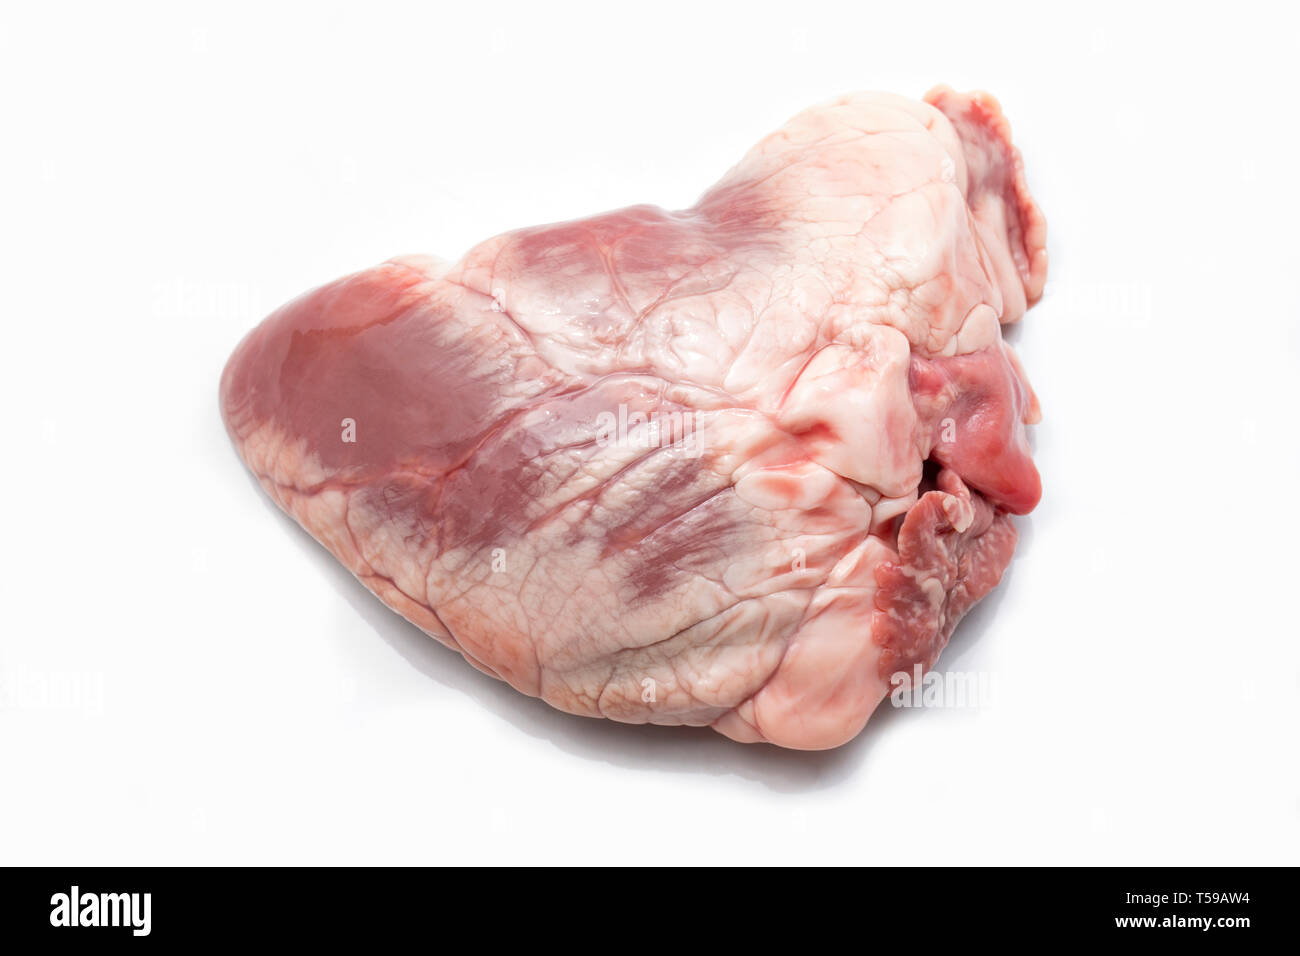 A raw lamb’s heart bought from a supermarket in the UK. Photographed on a white background. England UK GB Stock Photo